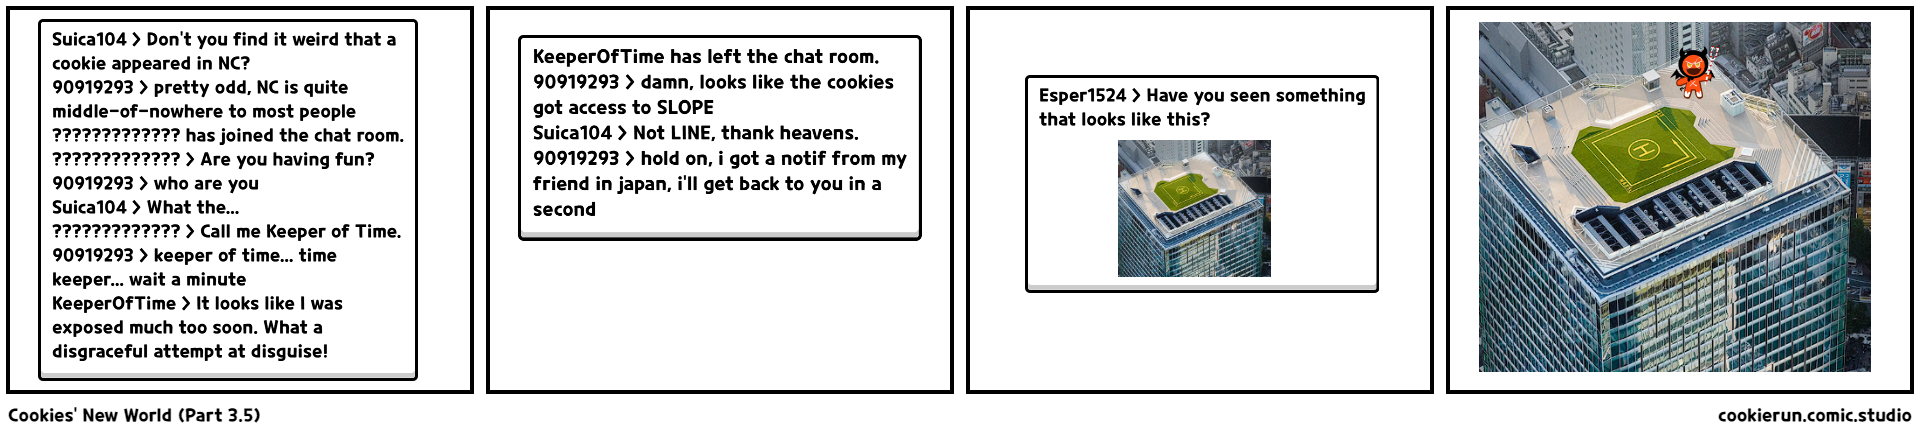 Cookies' New World (Part 3.5)